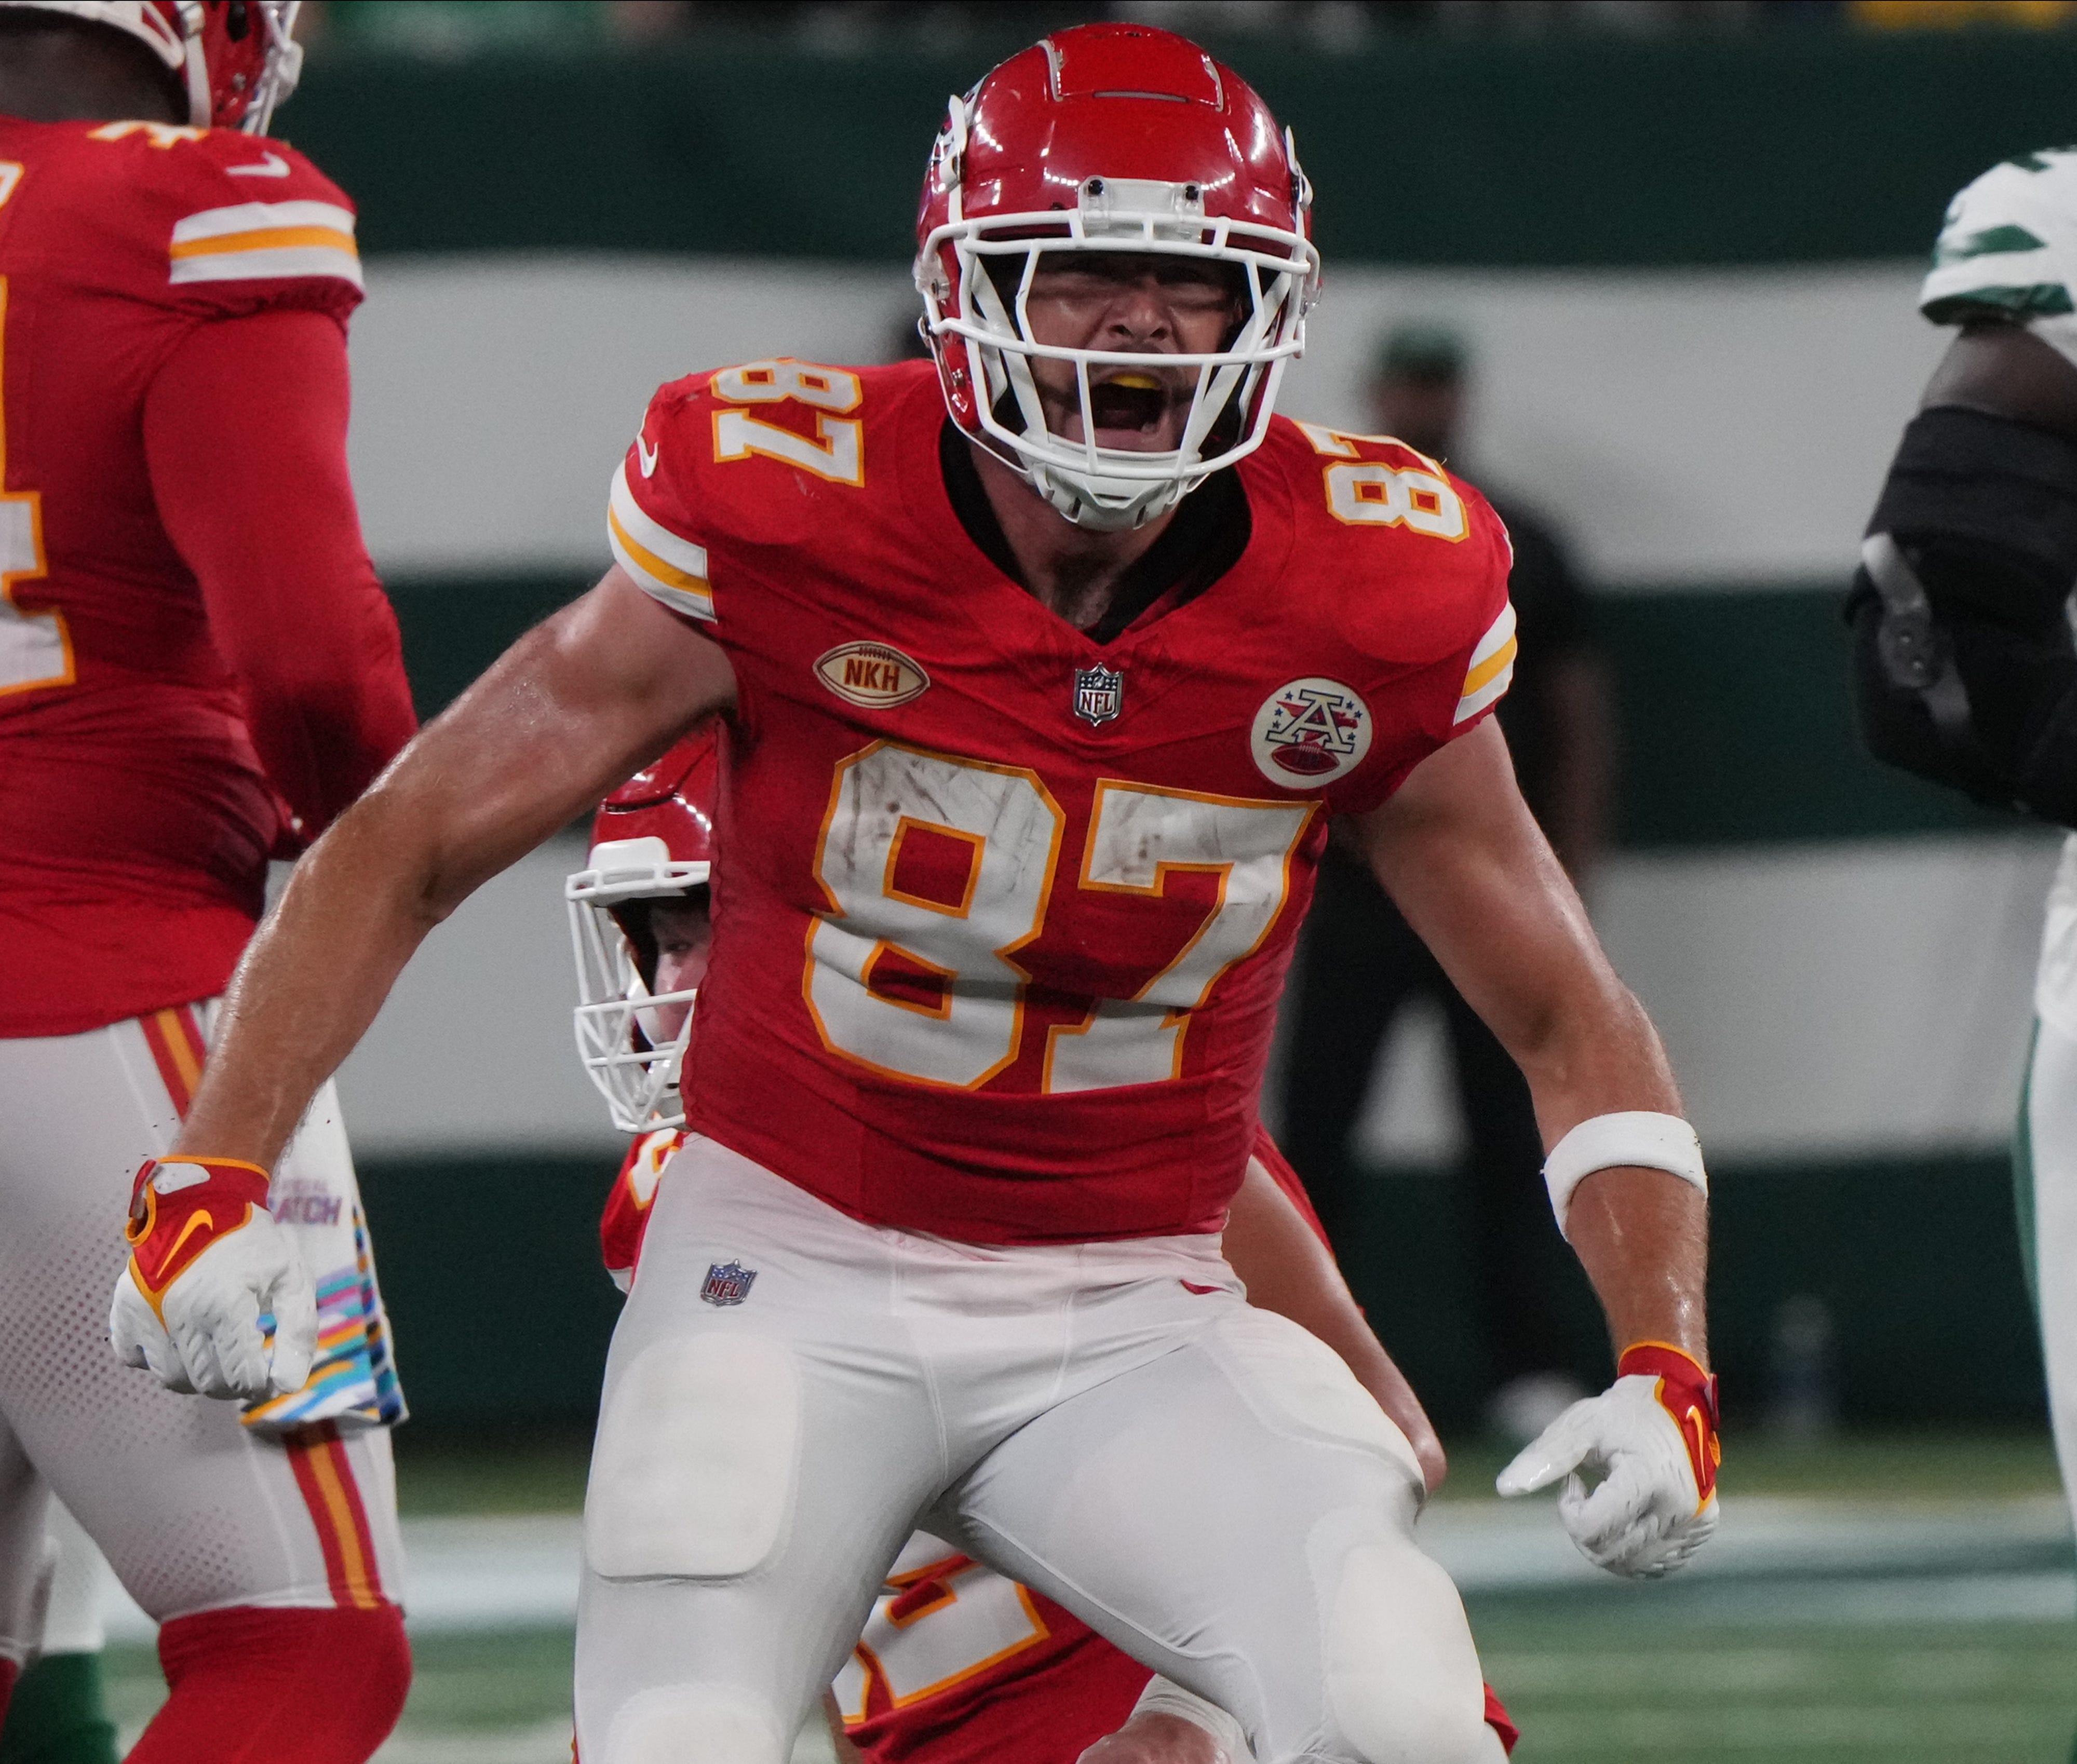 Best Bets for the Chiefs vs. Jets Sunday Night Football Game – NFL